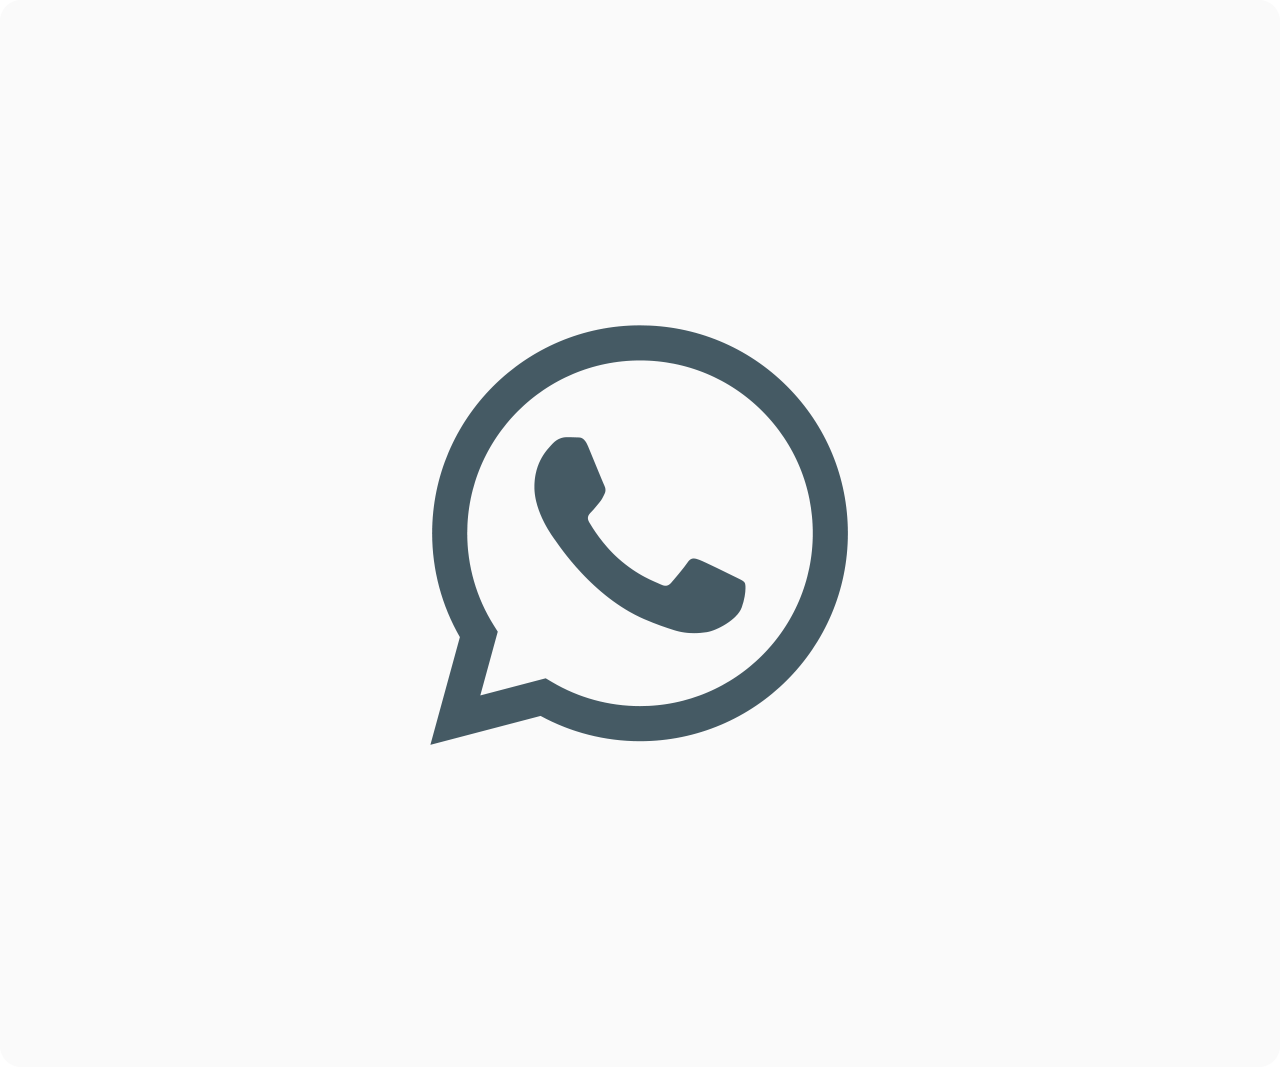 With Green Speech Bubble Phone Logo - WhatsApp Brand Resources